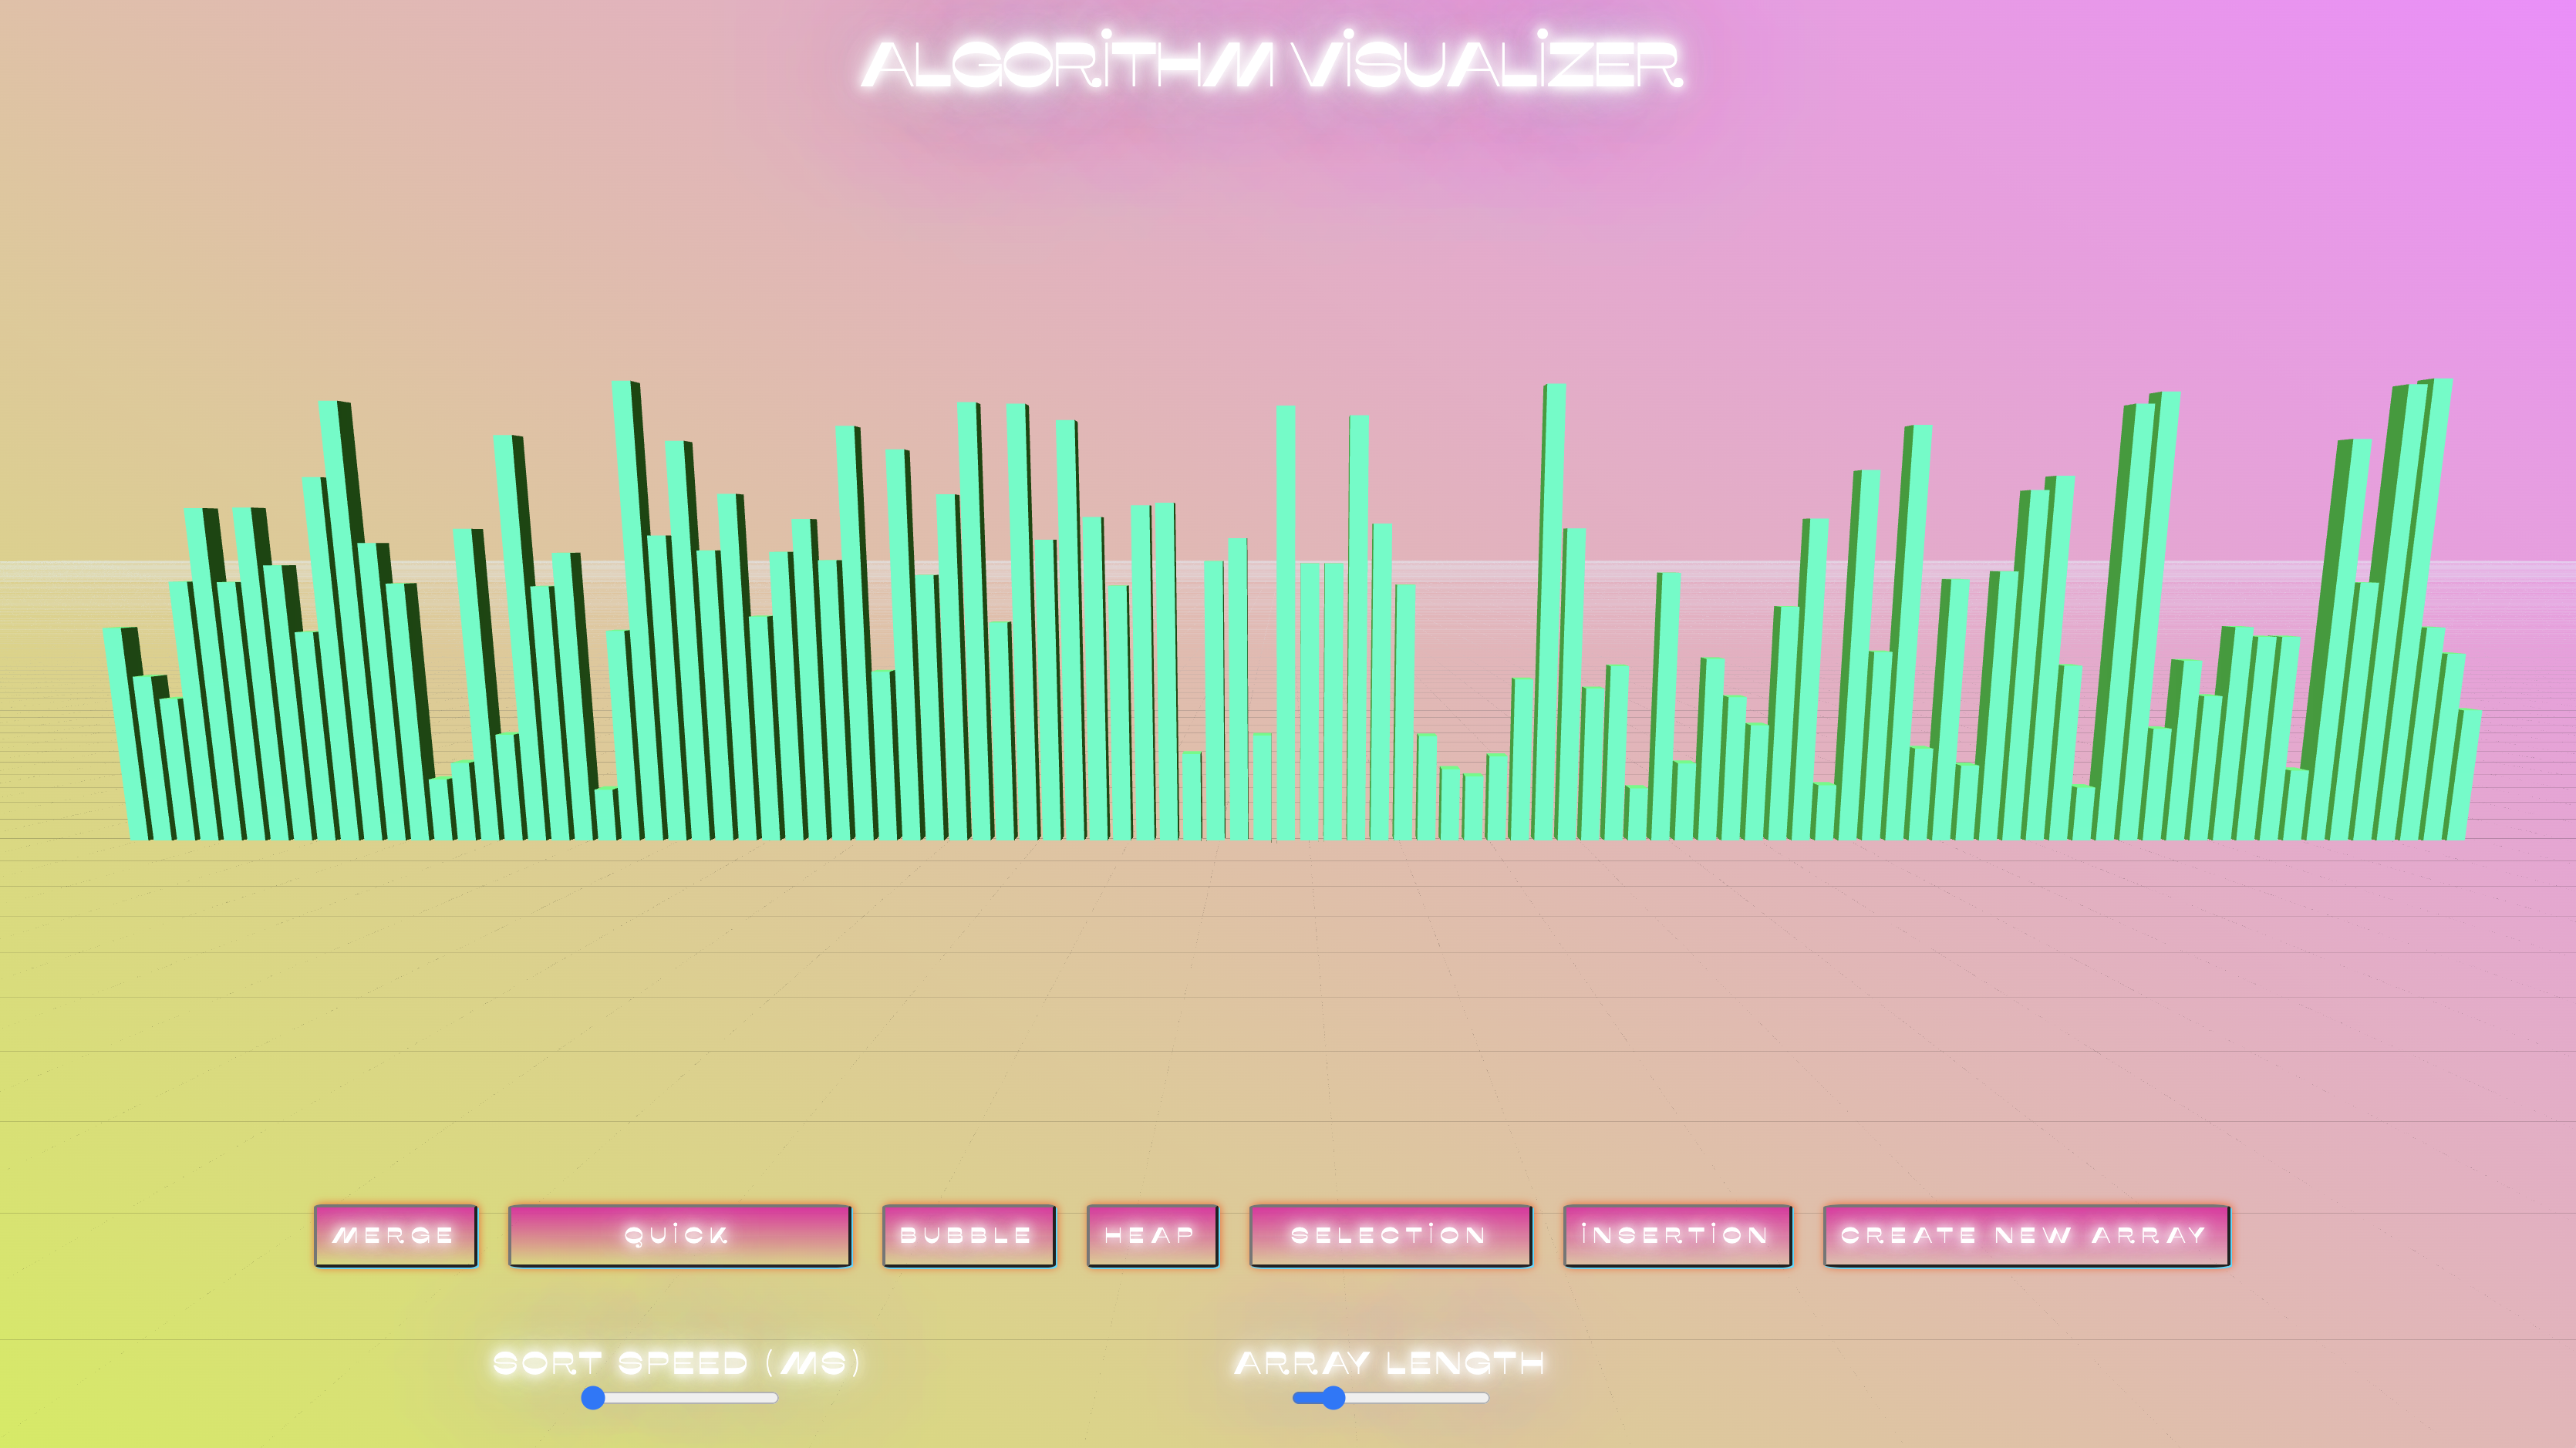 Screen shot of the Algorithm Visualizer Unsorted